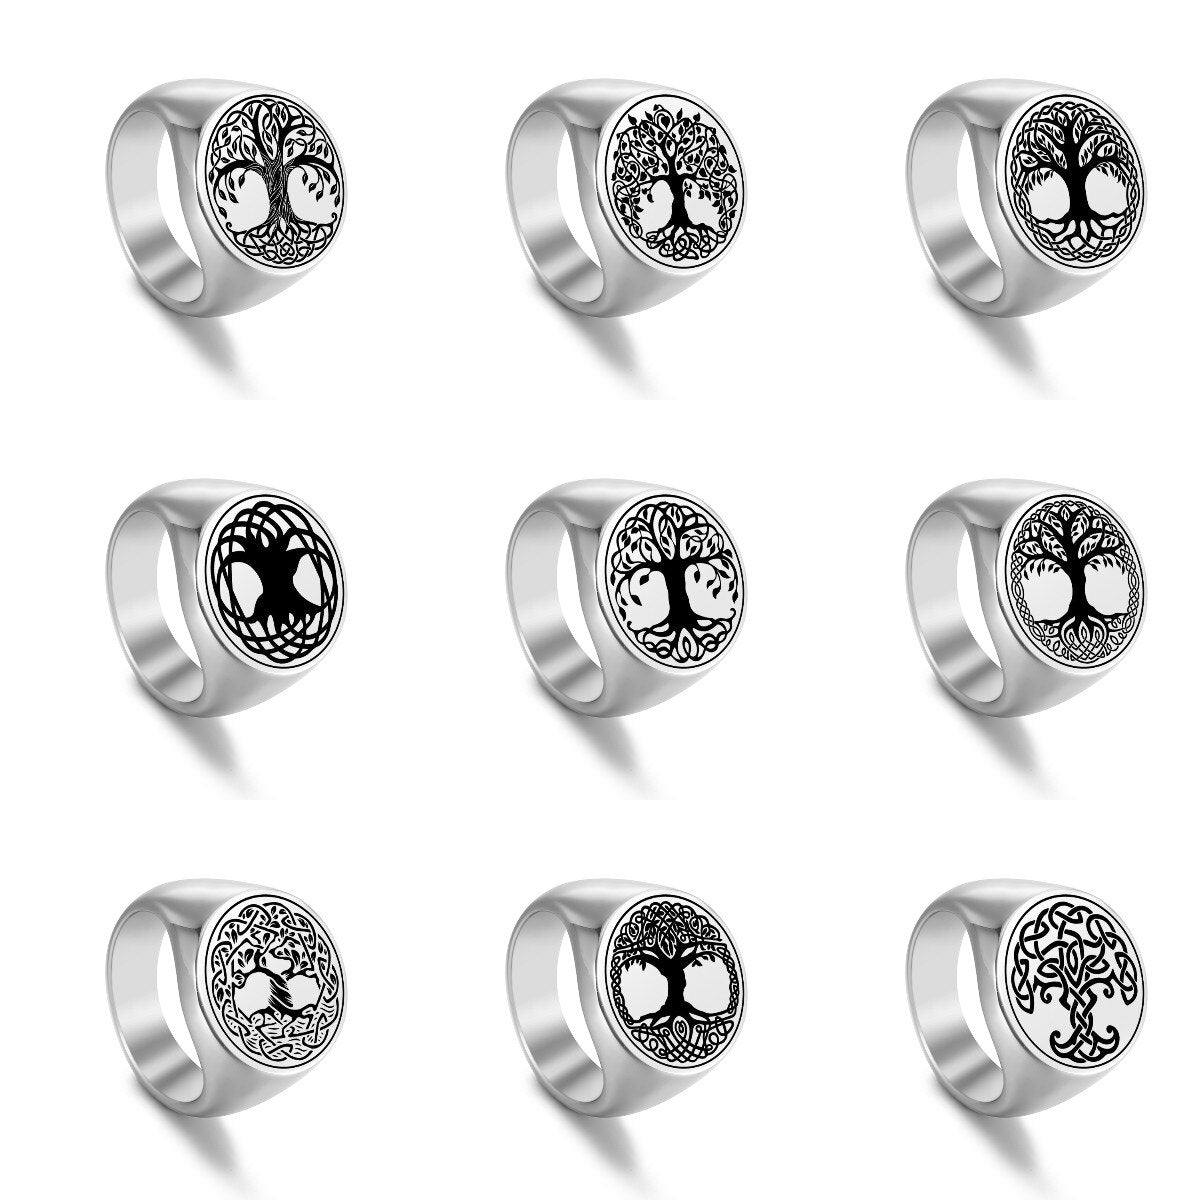 Tree of Life Stainless Steel Rings Delicate Round Tree Finger Ring Retro Pattern Jewelry for Men Women Christmas Gifts New In